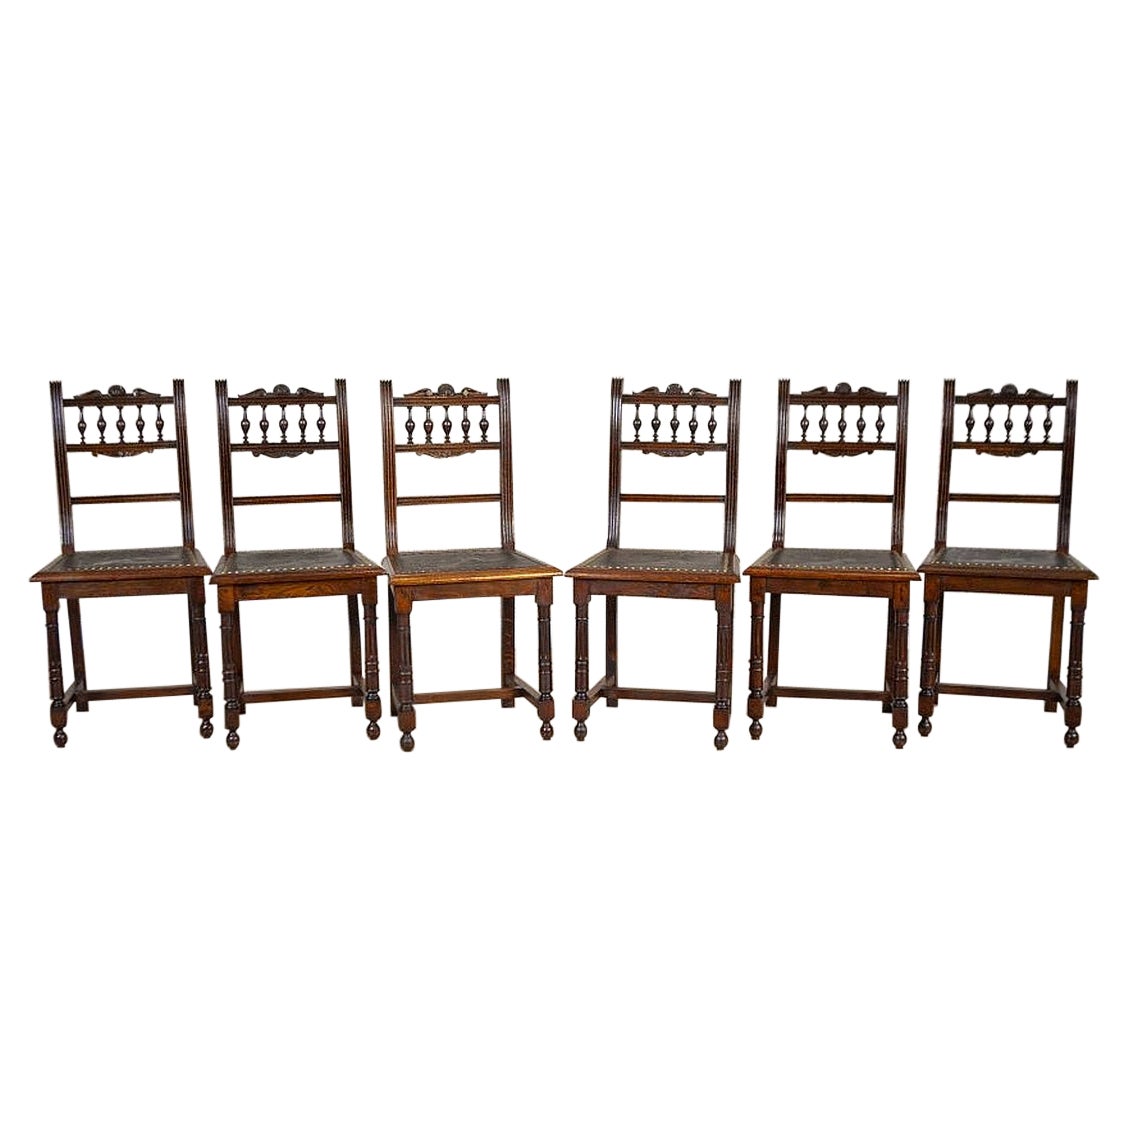 Set of Decorative Oak Chairs From the, Early 20th Century